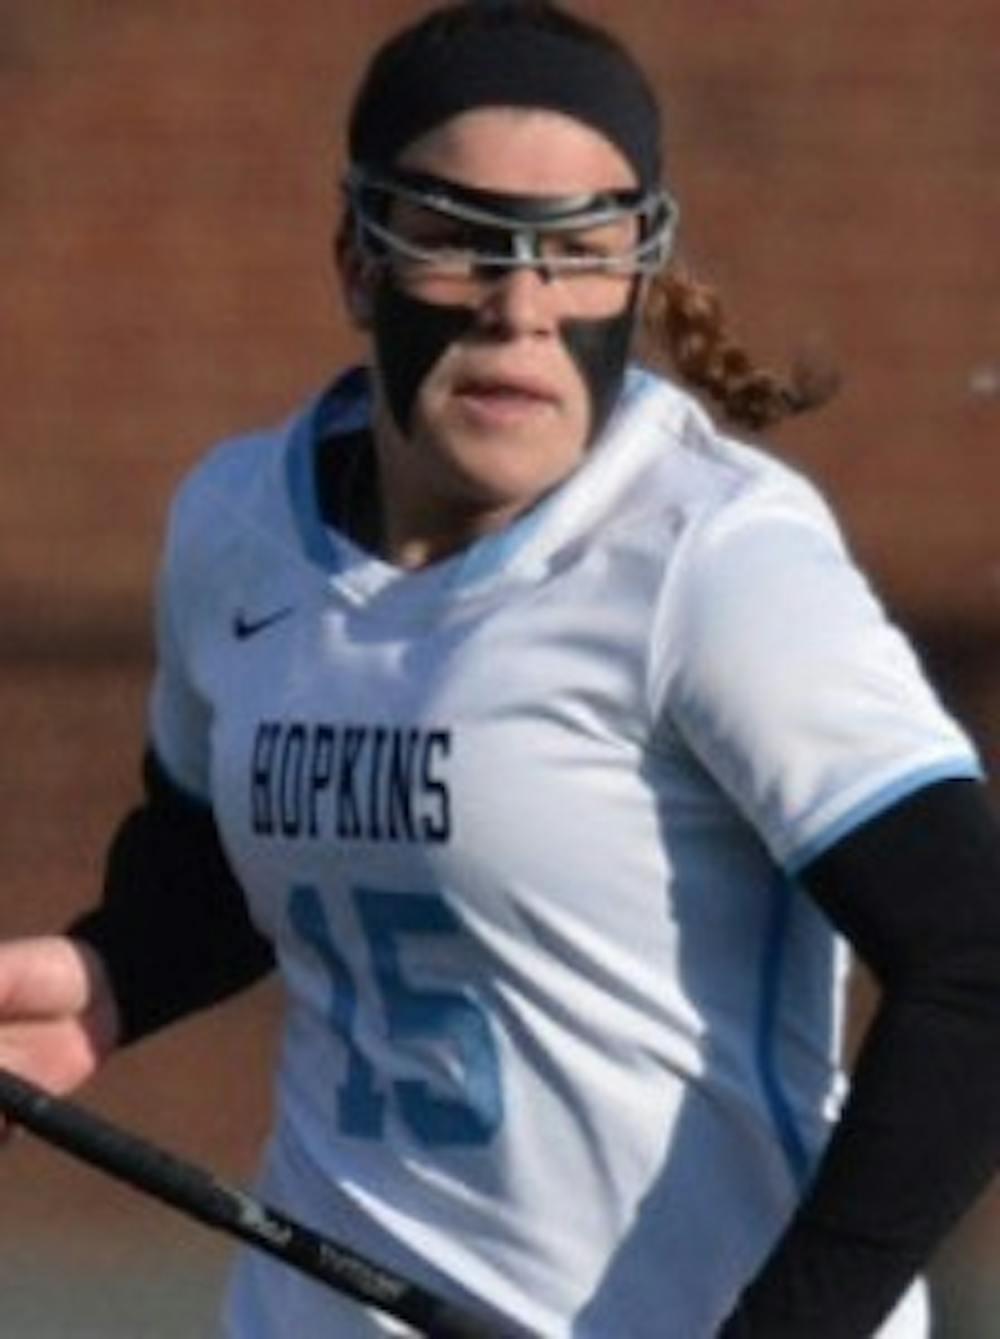  hopkinssports.com
DiMartino scored three of the Jays’ four goals on the afternoon vs. Towson